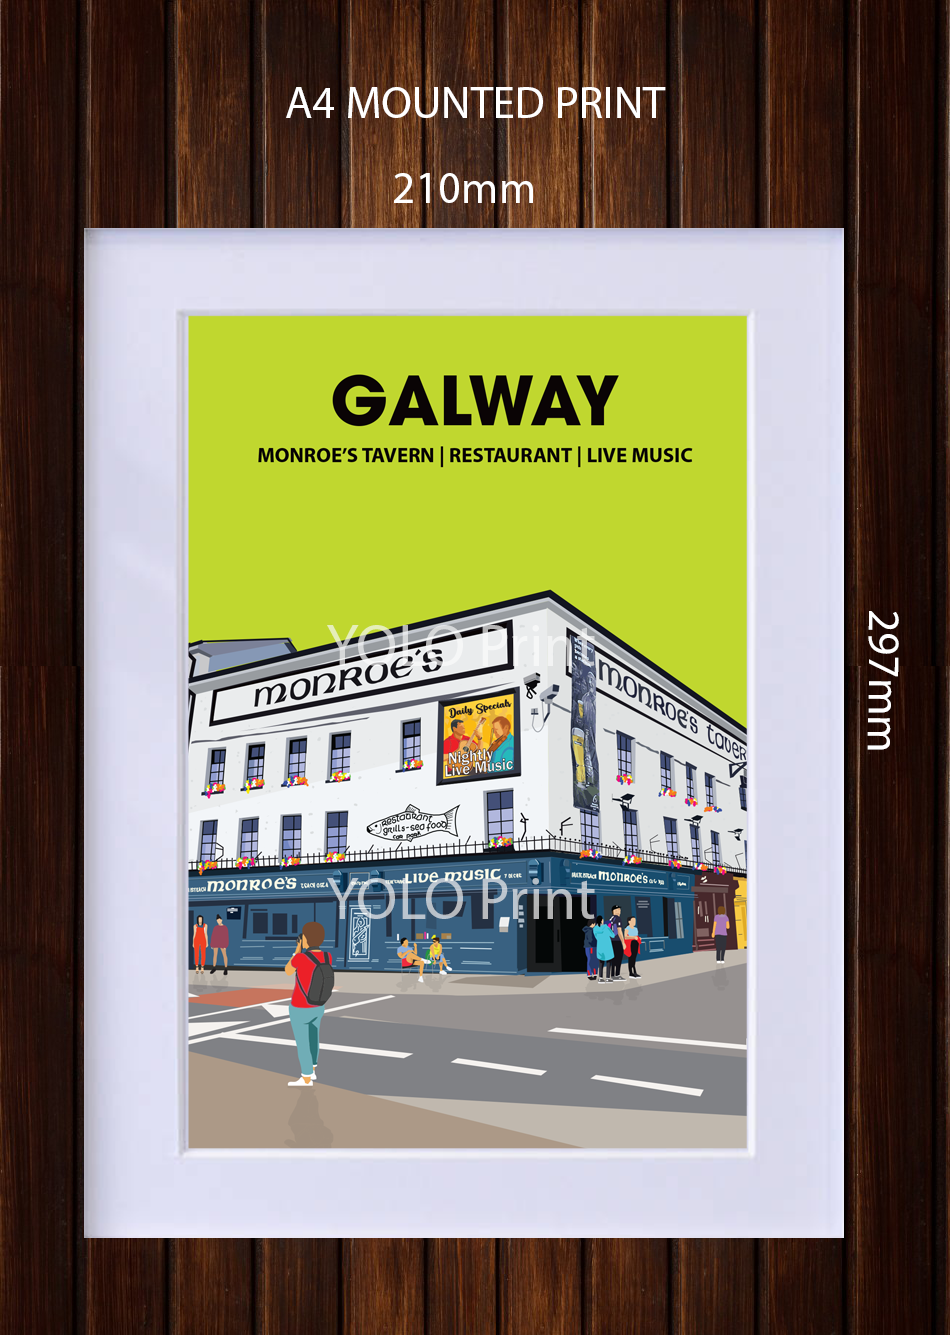 Galway Postcard or A4 Mounted Print  - Monroes Tavern with QR CODE Link